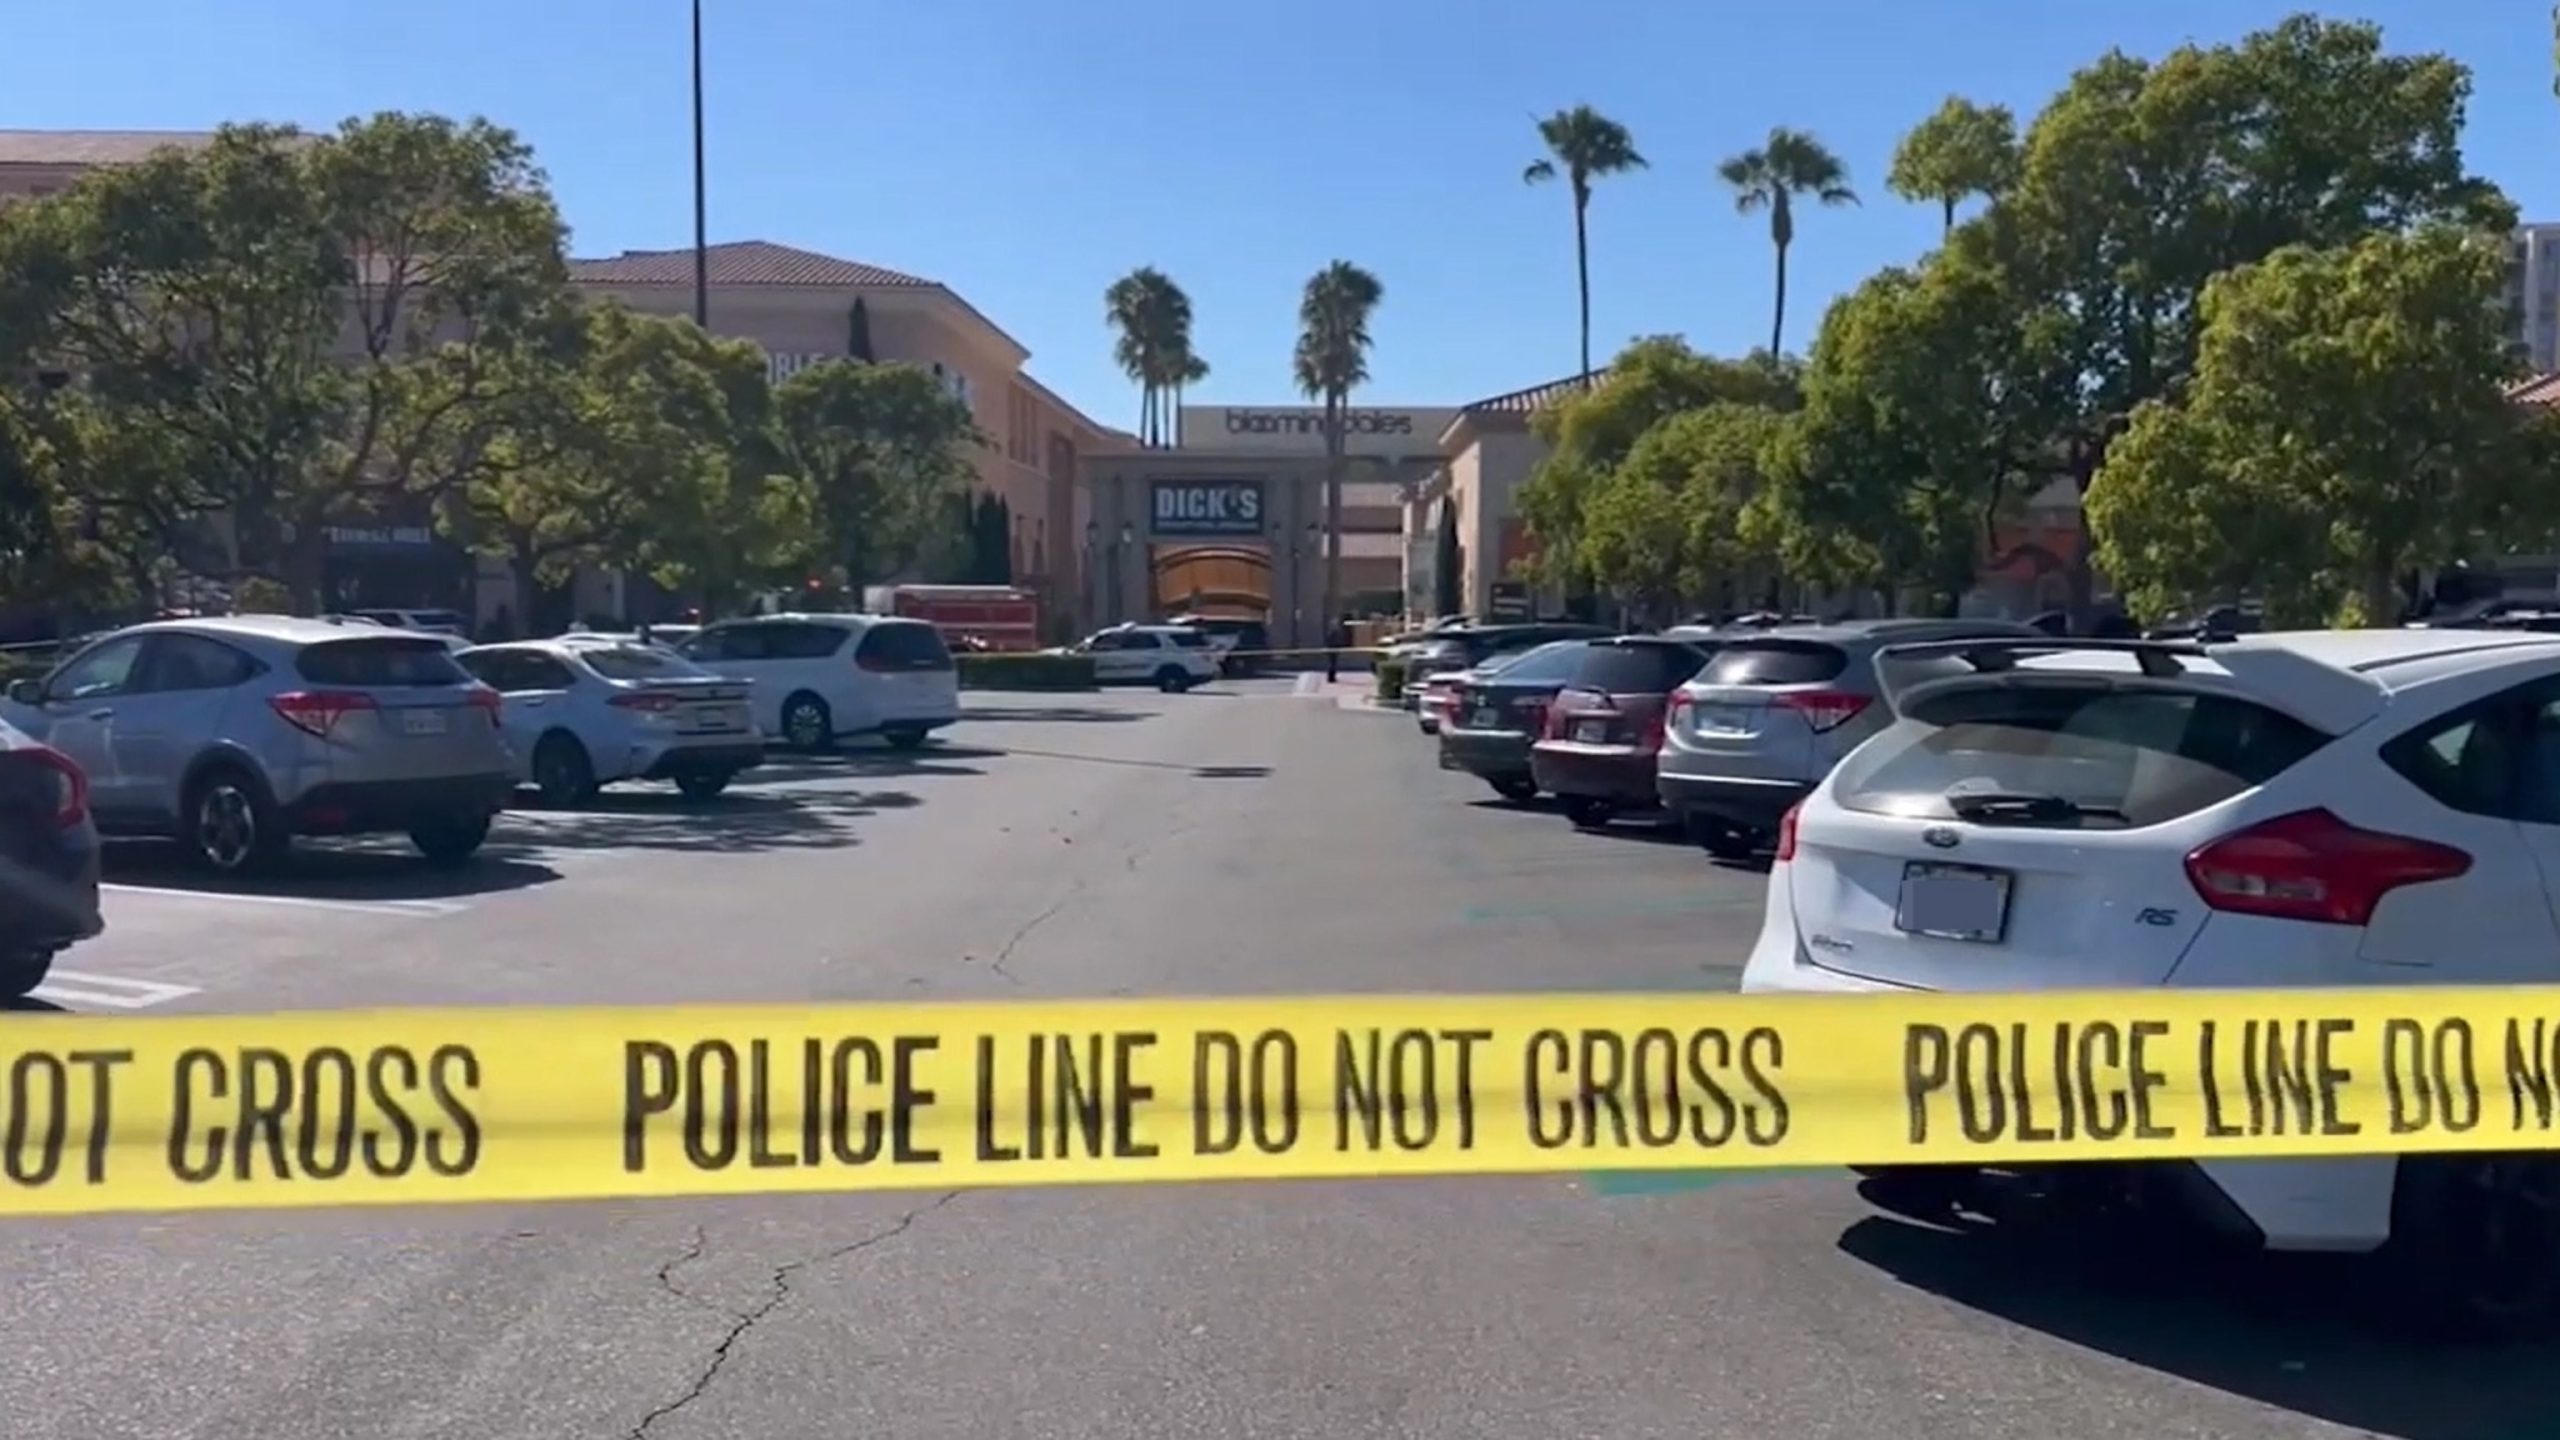 Police report a tourist was fatally struck by suspects' vehicle during a robbery at an outdoor mall in California.